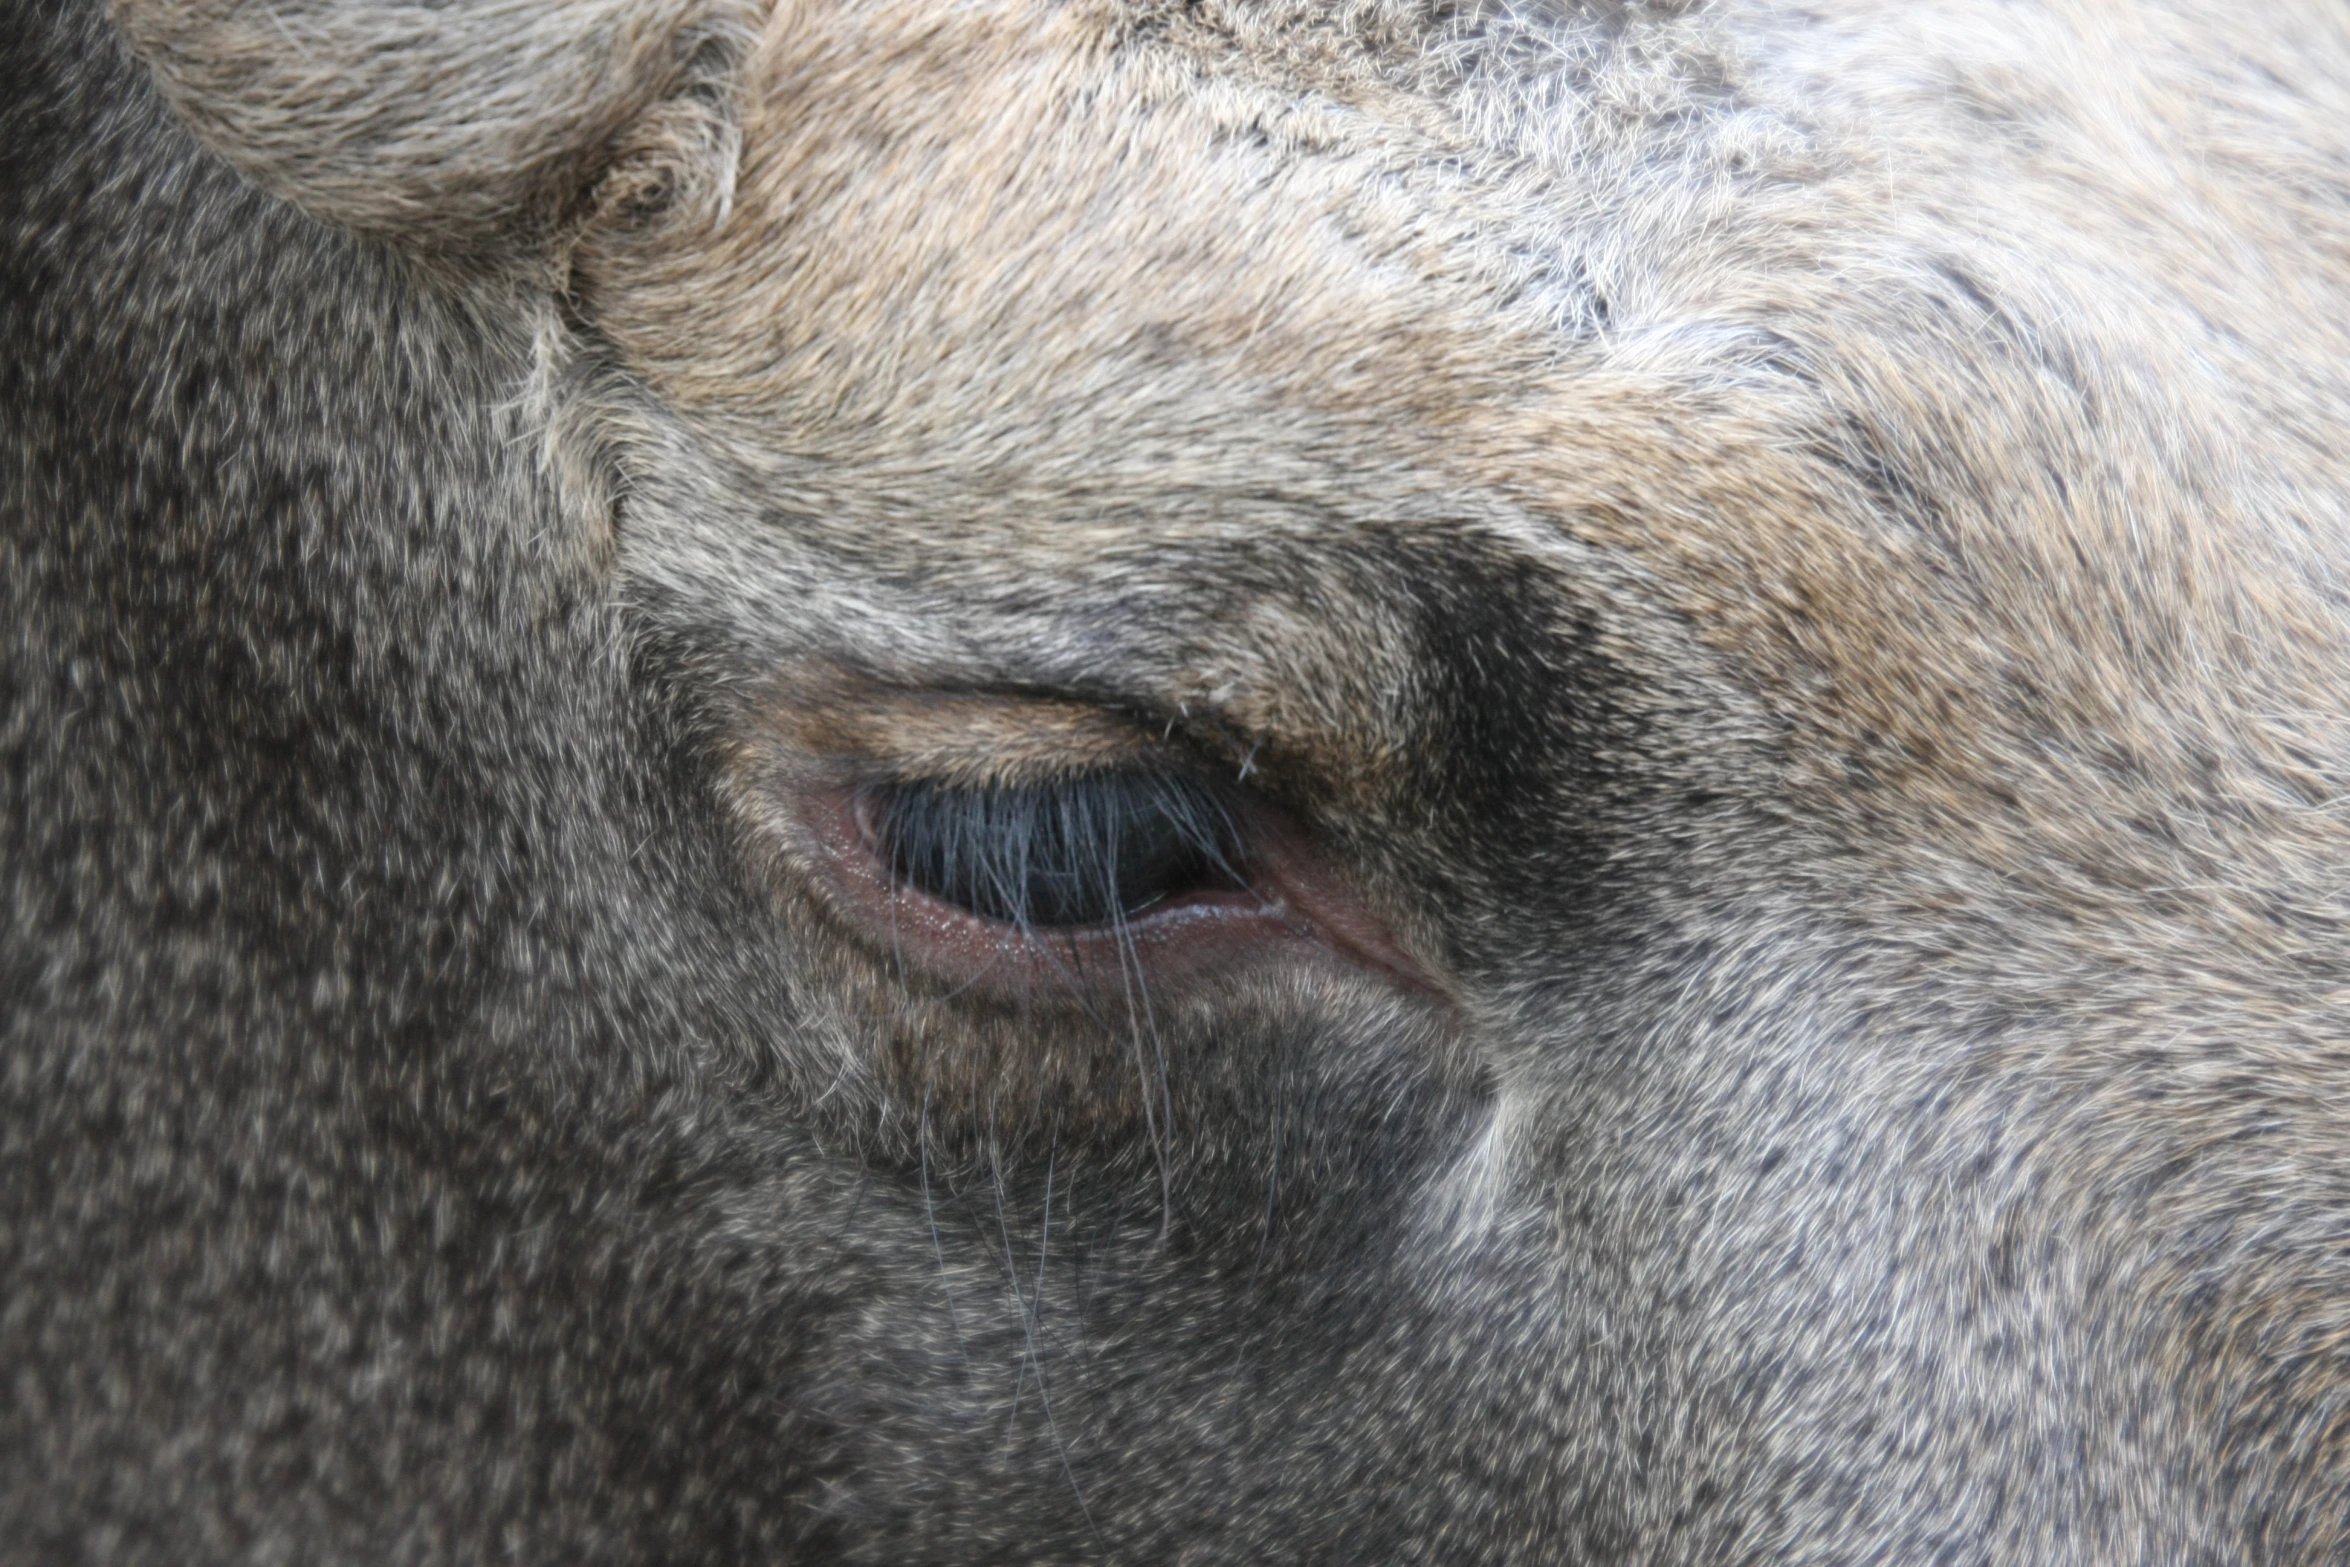 the animal has the eye of a cow